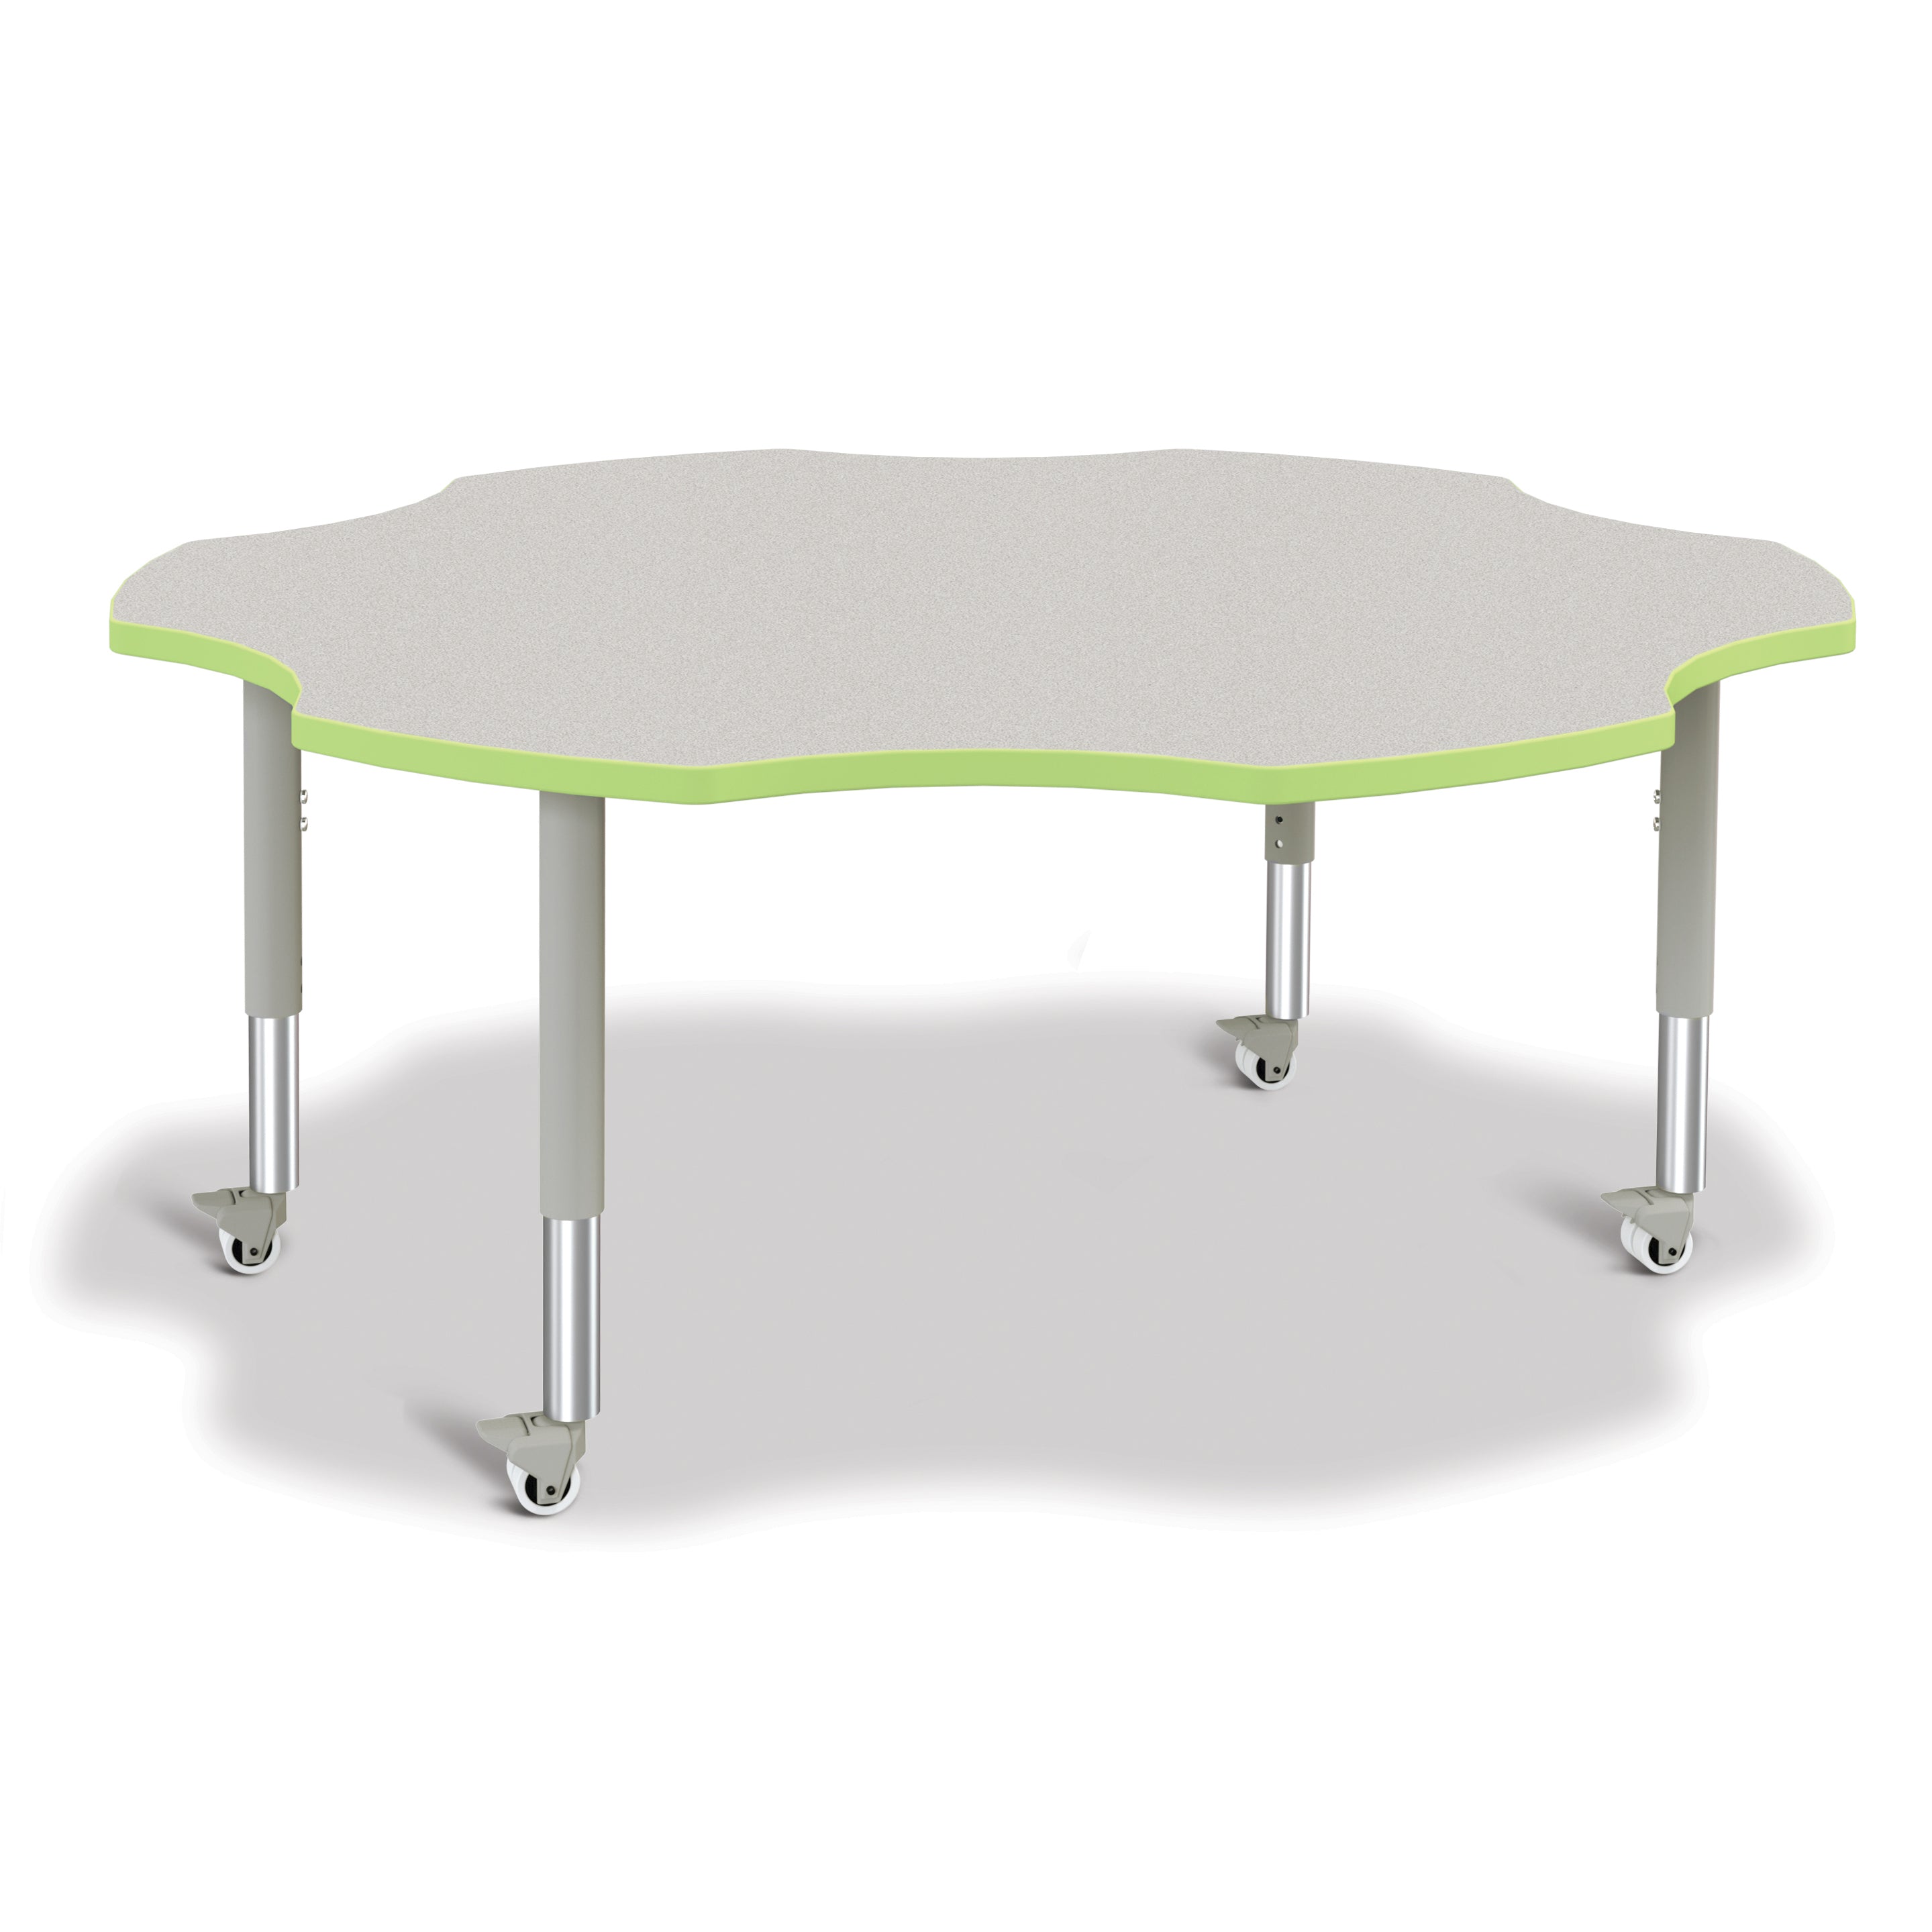 6458JCM130, Berries Six Leaf Activity Table - 60", Mobile - Freckled Gray/Key Lime/Gray